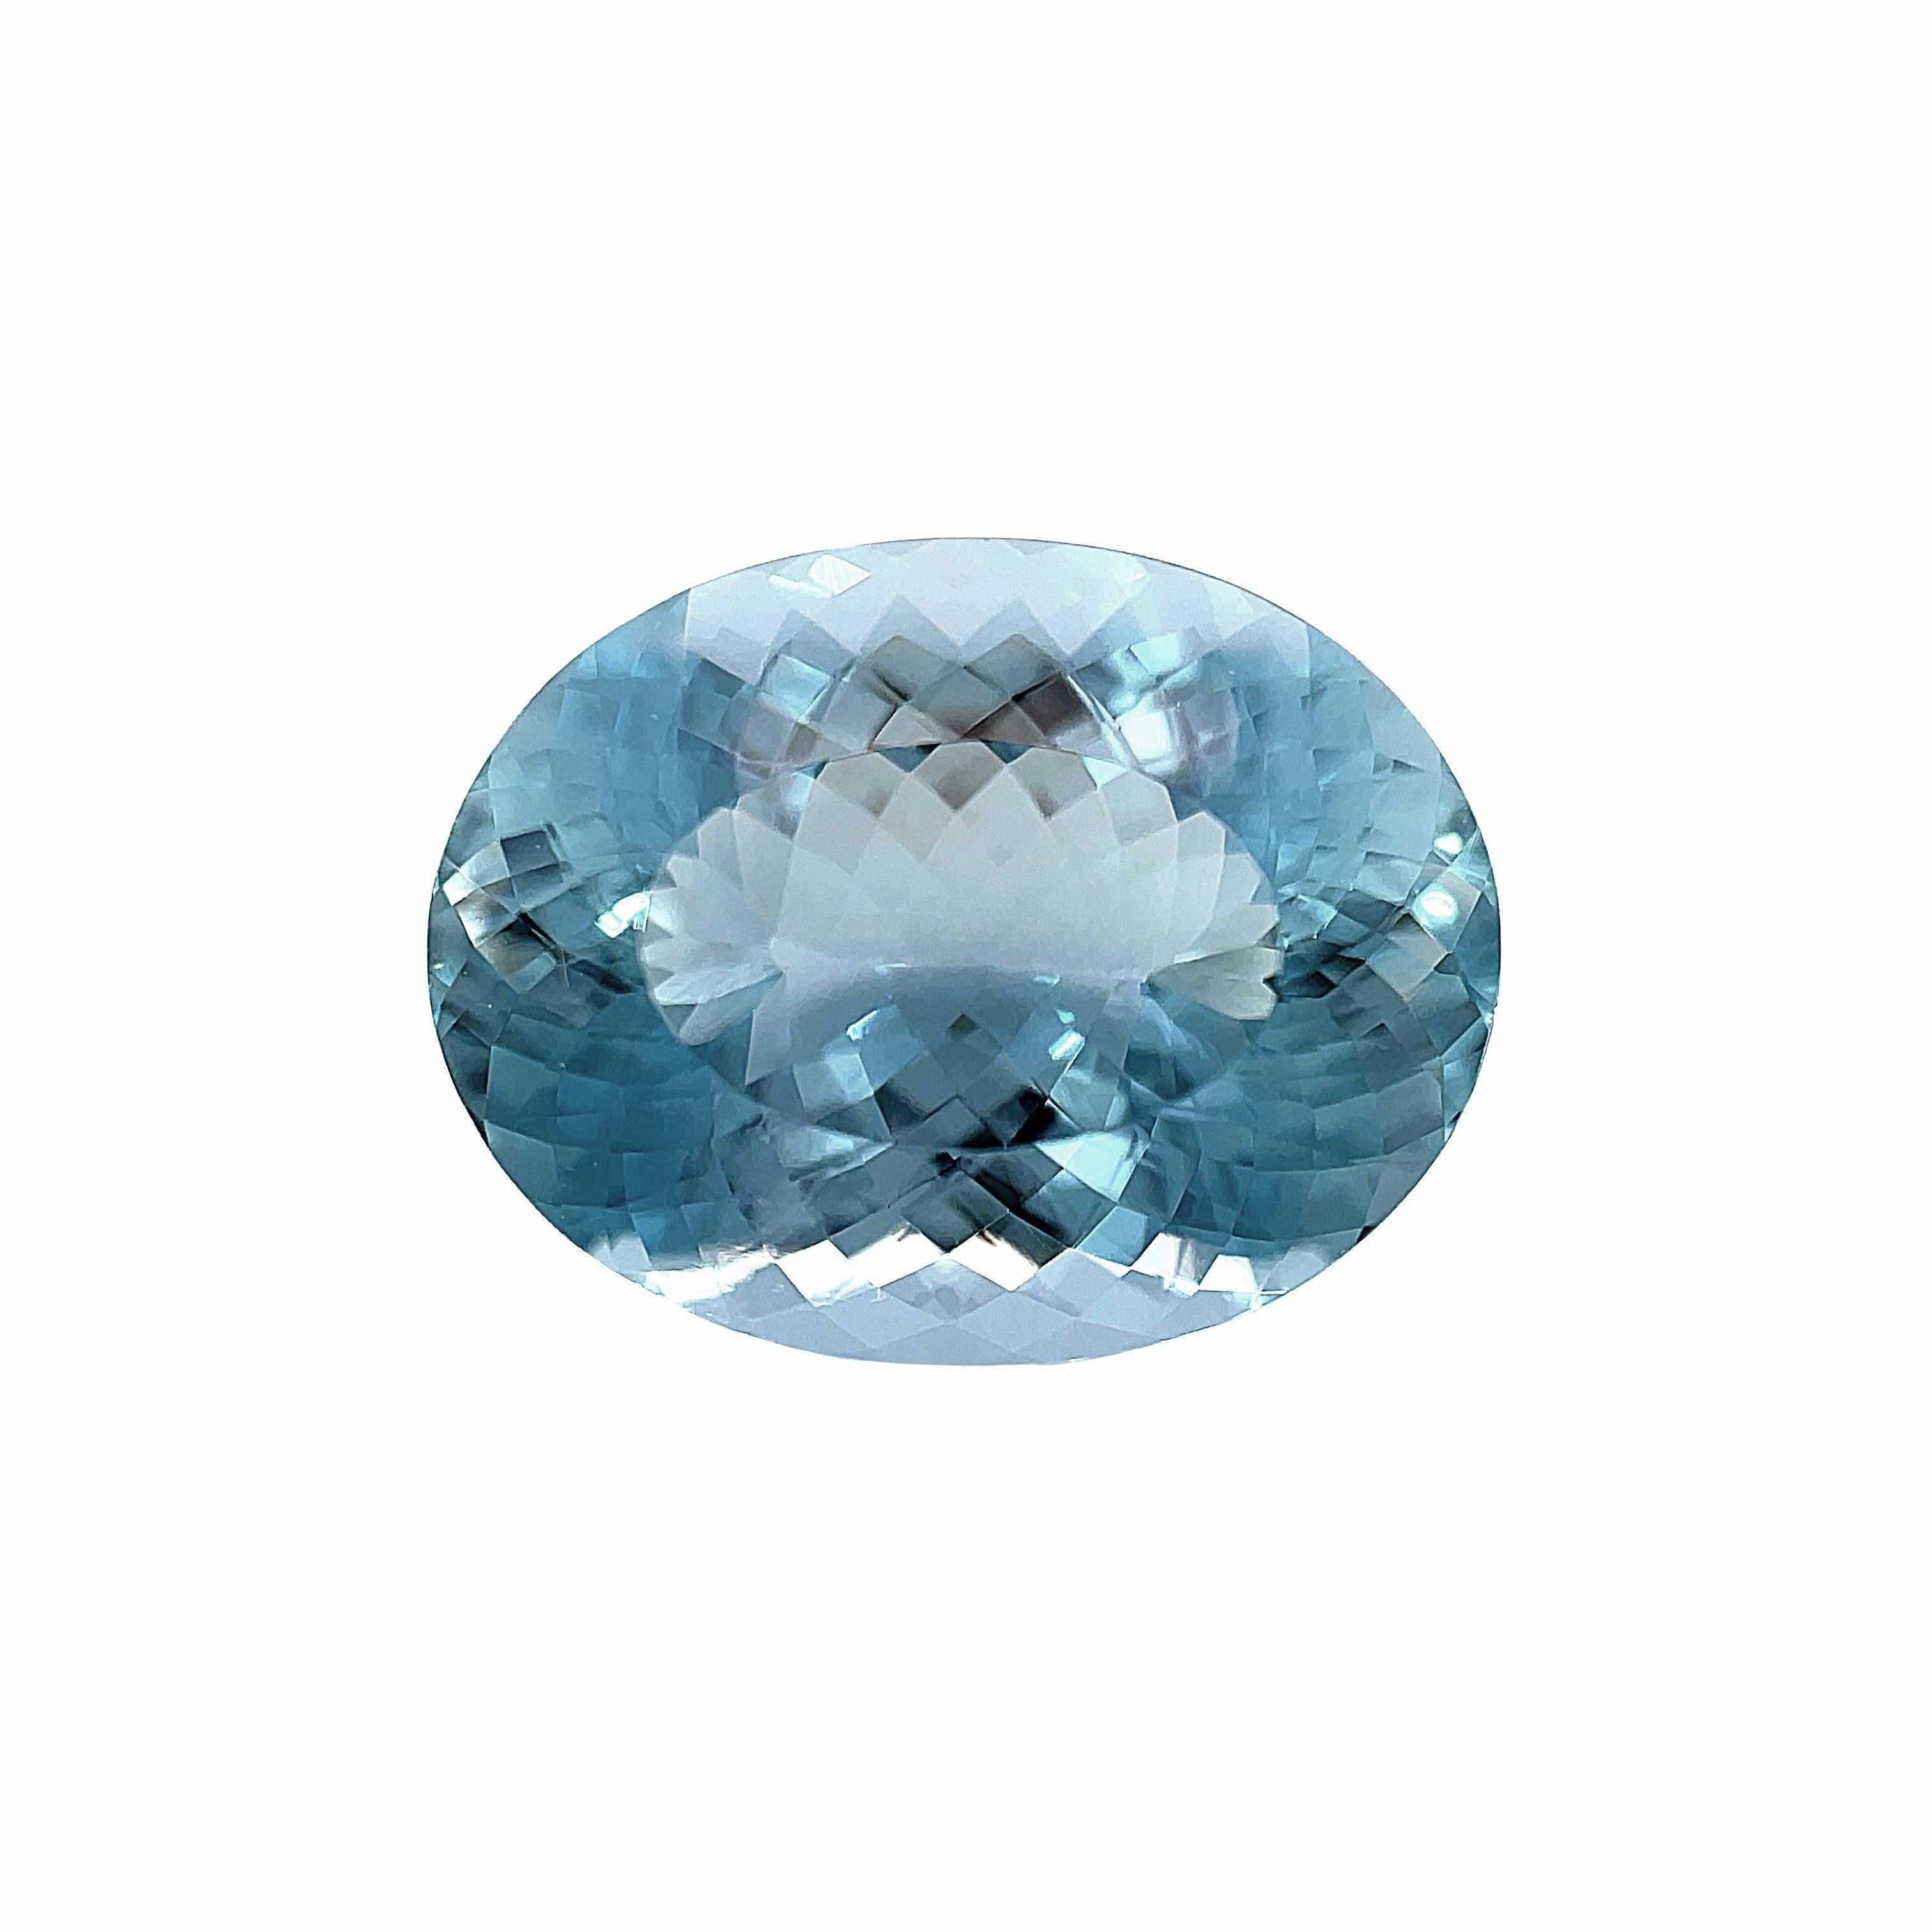 This beautifully crystalline aquamarine is a perfectly shaped oval weighing 7.25 carats and would make a spectacular ring or pendant. Brilliantly faceted with extraordinary life and sparkle! This has vivid blue color with much more saturation than